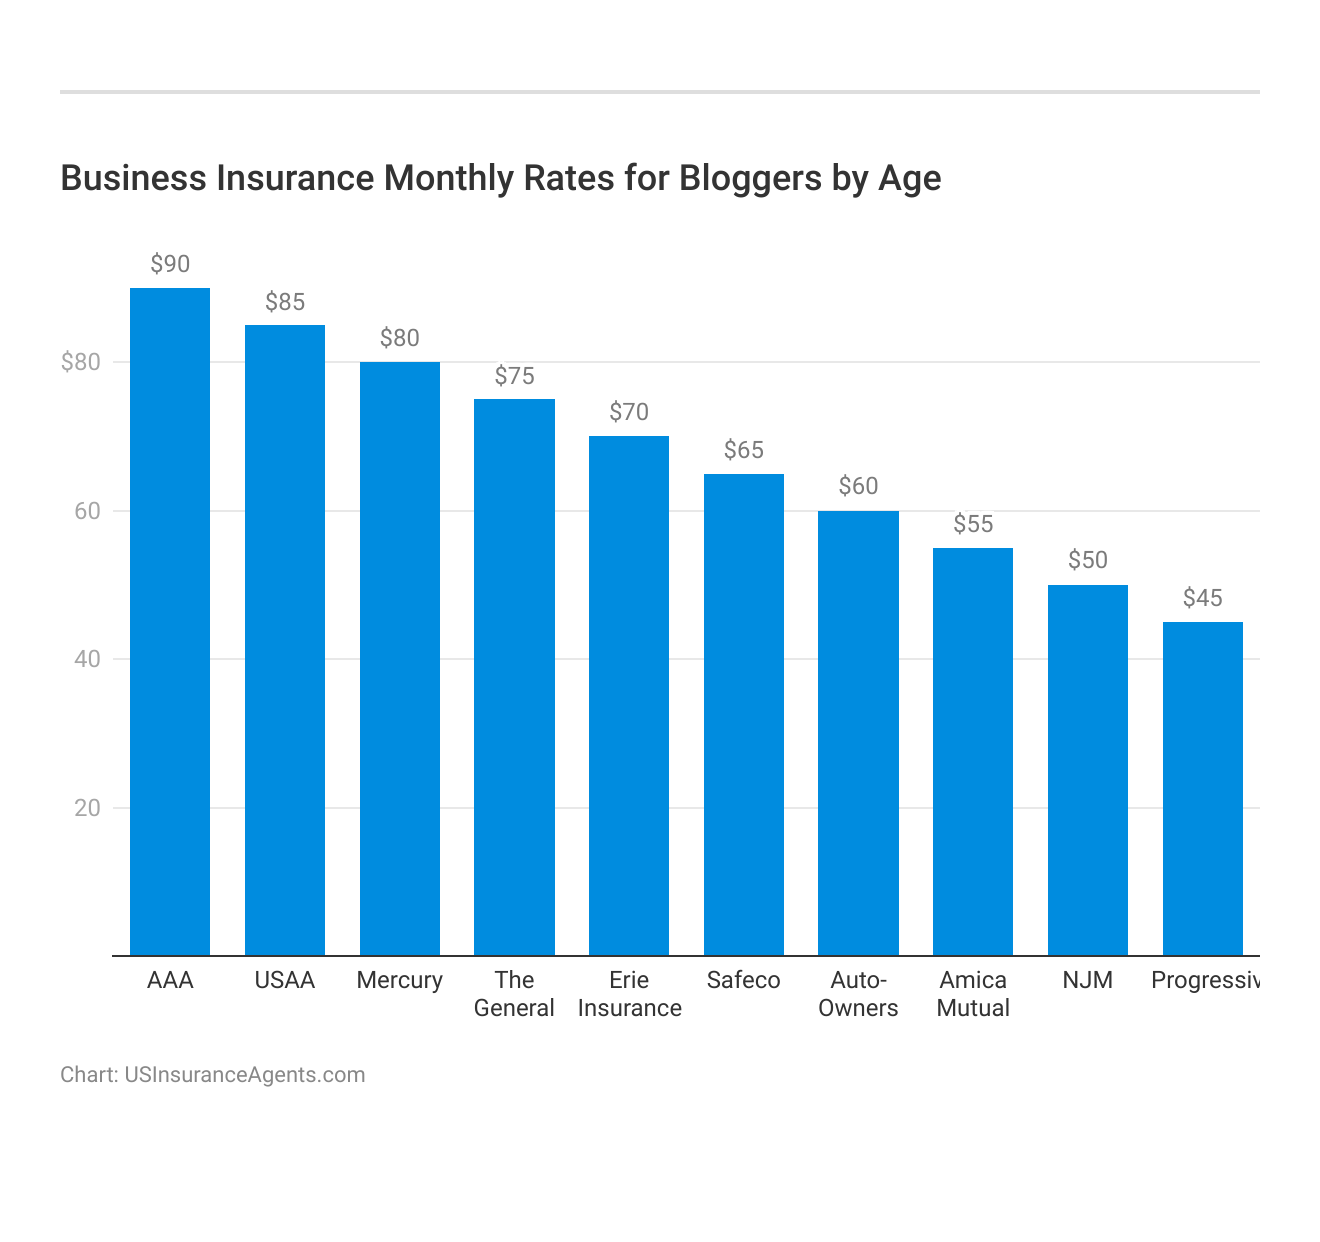 <h3>Business Insurance Monthly Rates for Bloggers by Age</h3>